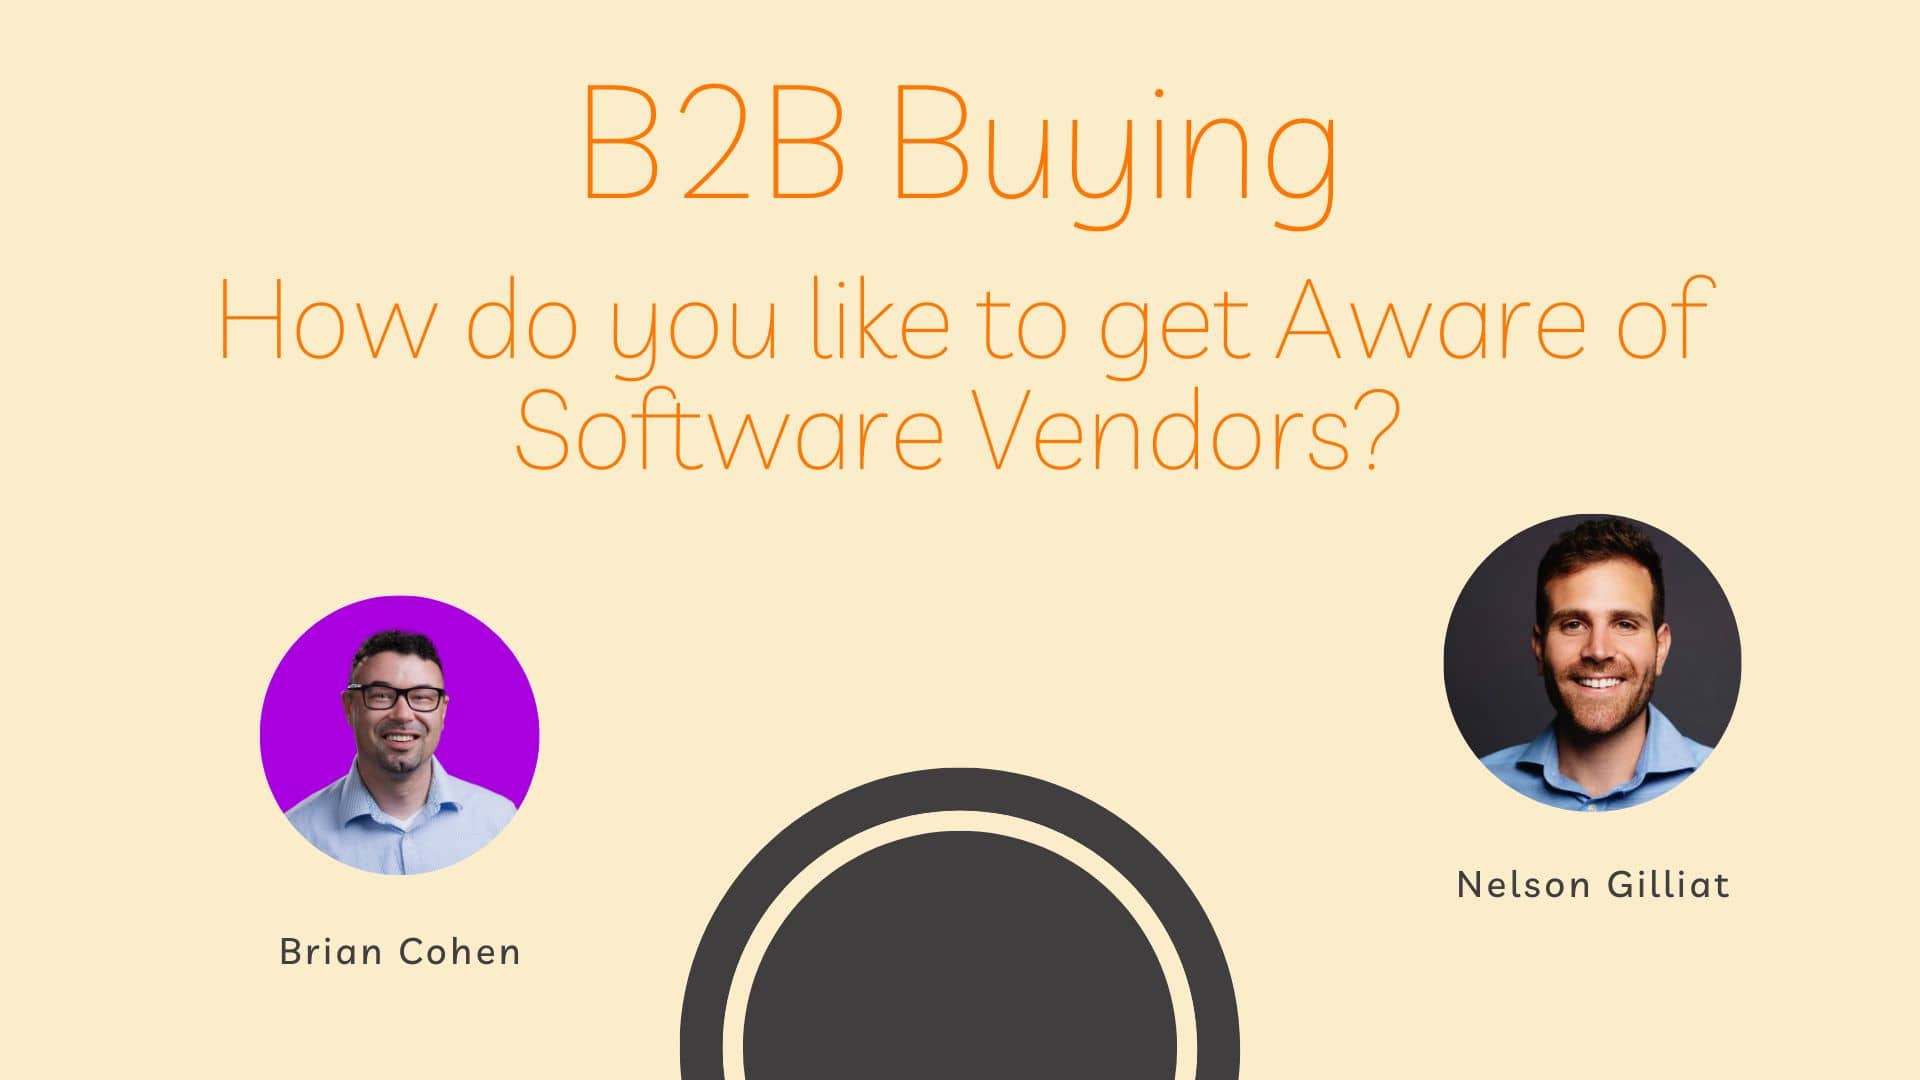 B2B Buying Process - How do you like to get Aware of Software Vendors?